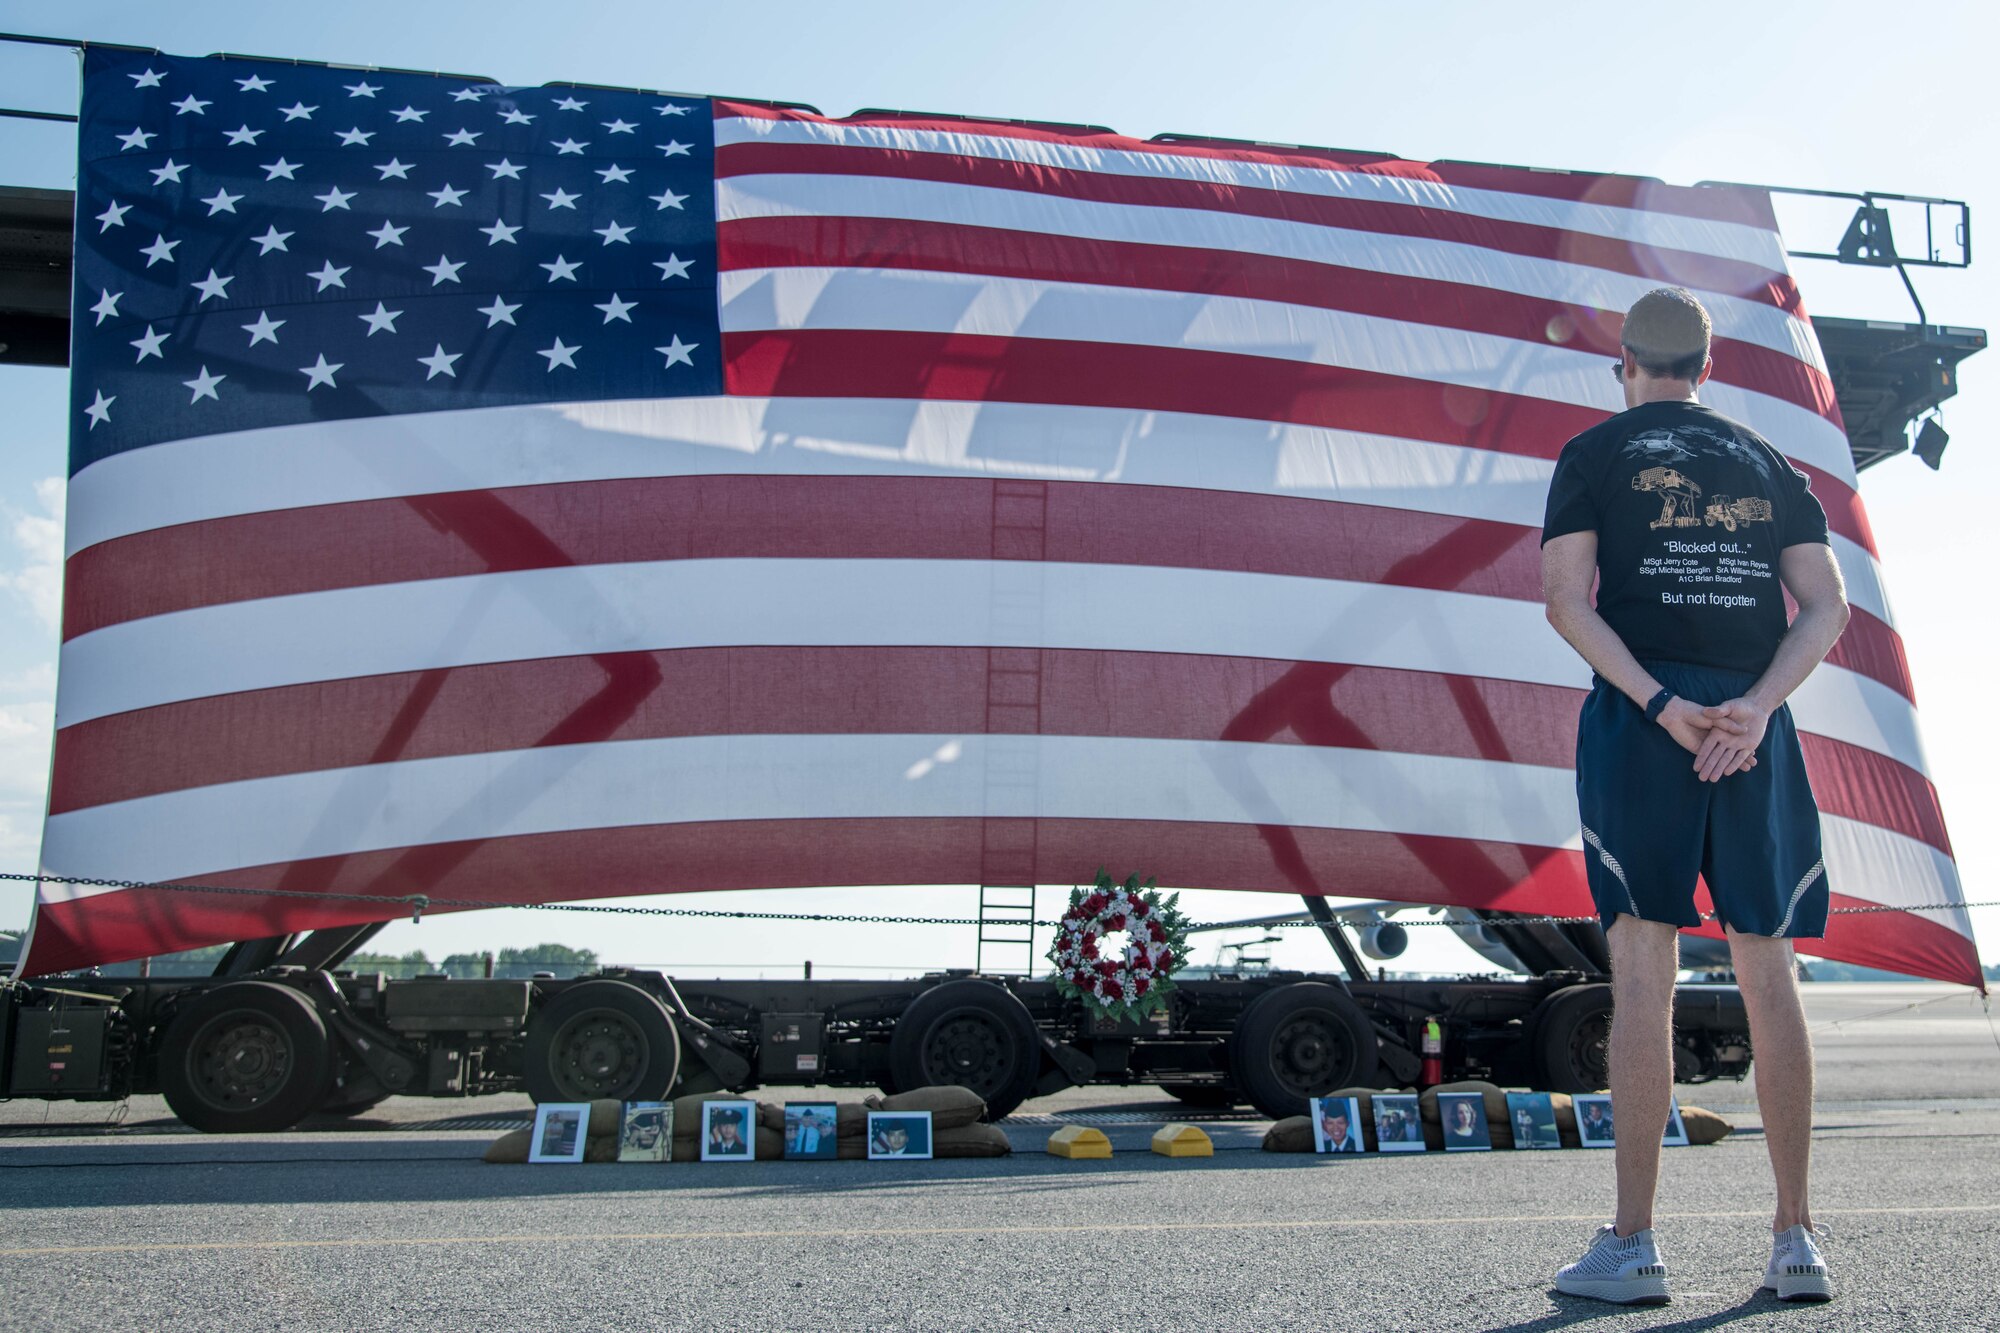 Lt. Col. Lawrence Smith, 436th Aerial Port Squadron commander, awaits the start of the annual Port Dawg Memorial 5K to honor fallen Port Dawgs June 29, 2020, at Dover Air Force Base, Delaware. Smith has led the past four runs as commander of the squadron, but this is his last one. (U.S. Air Force photo by Airman 1st Class Faith Schaefer)